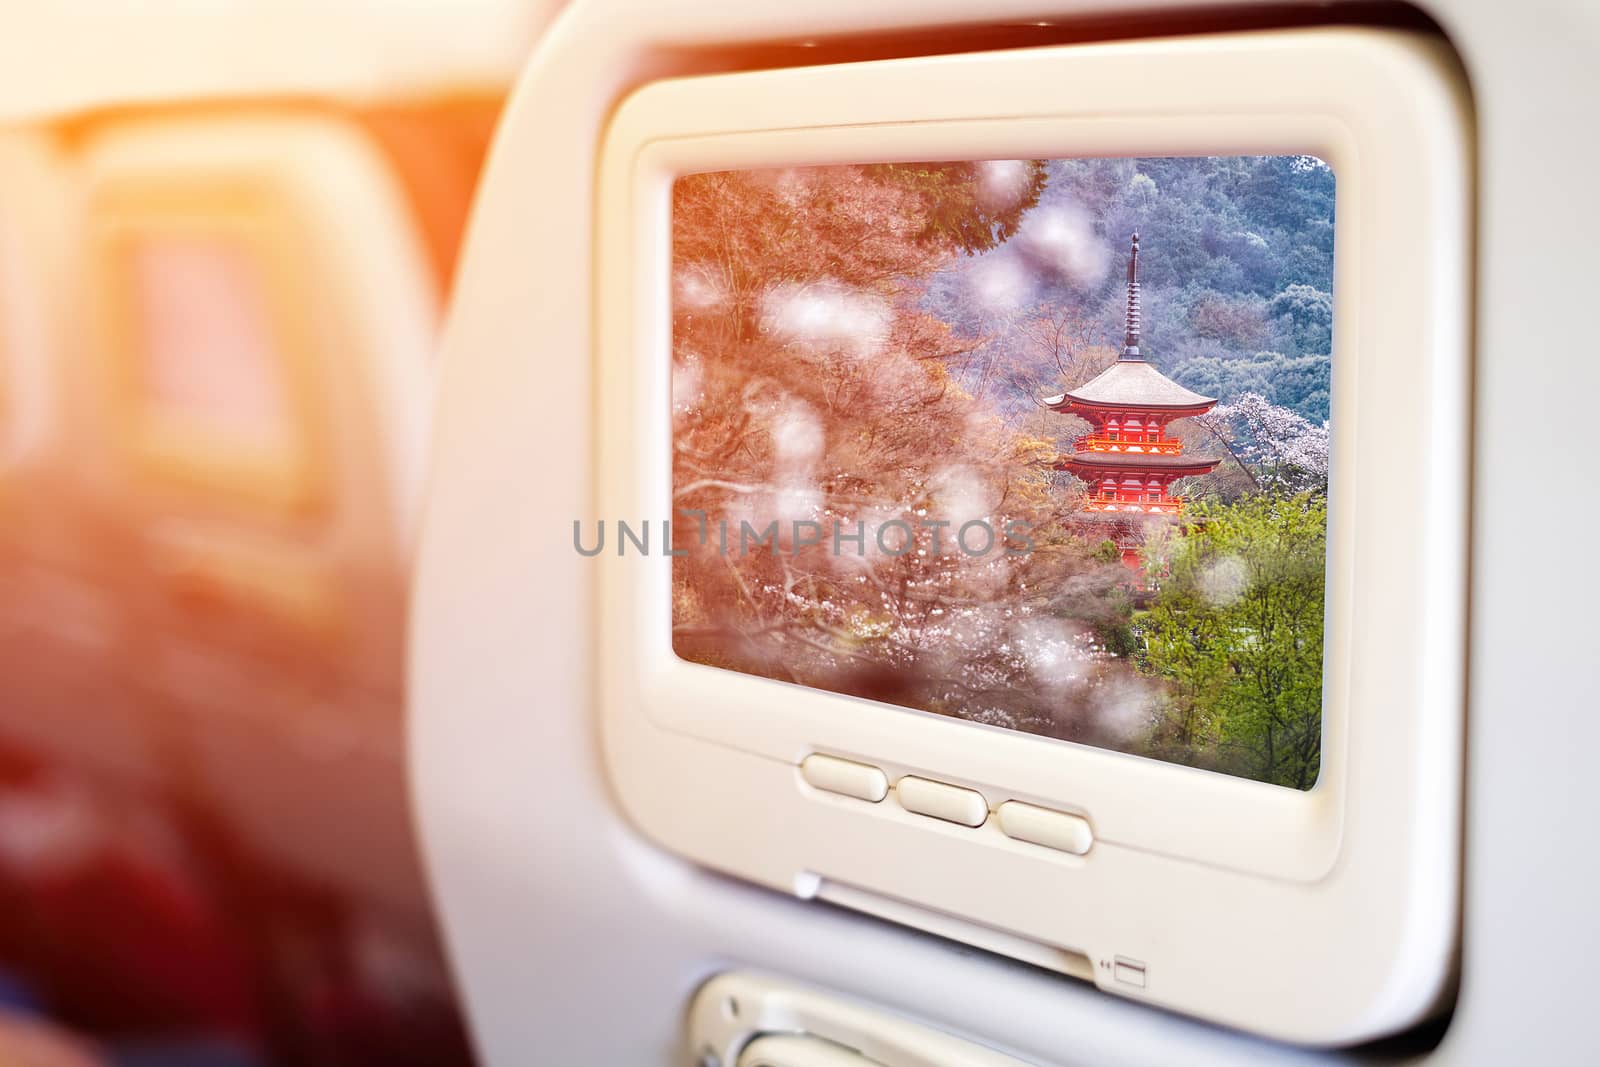 Aircraft monitor in front of passenger seat showing Aircraft mon by Surasak